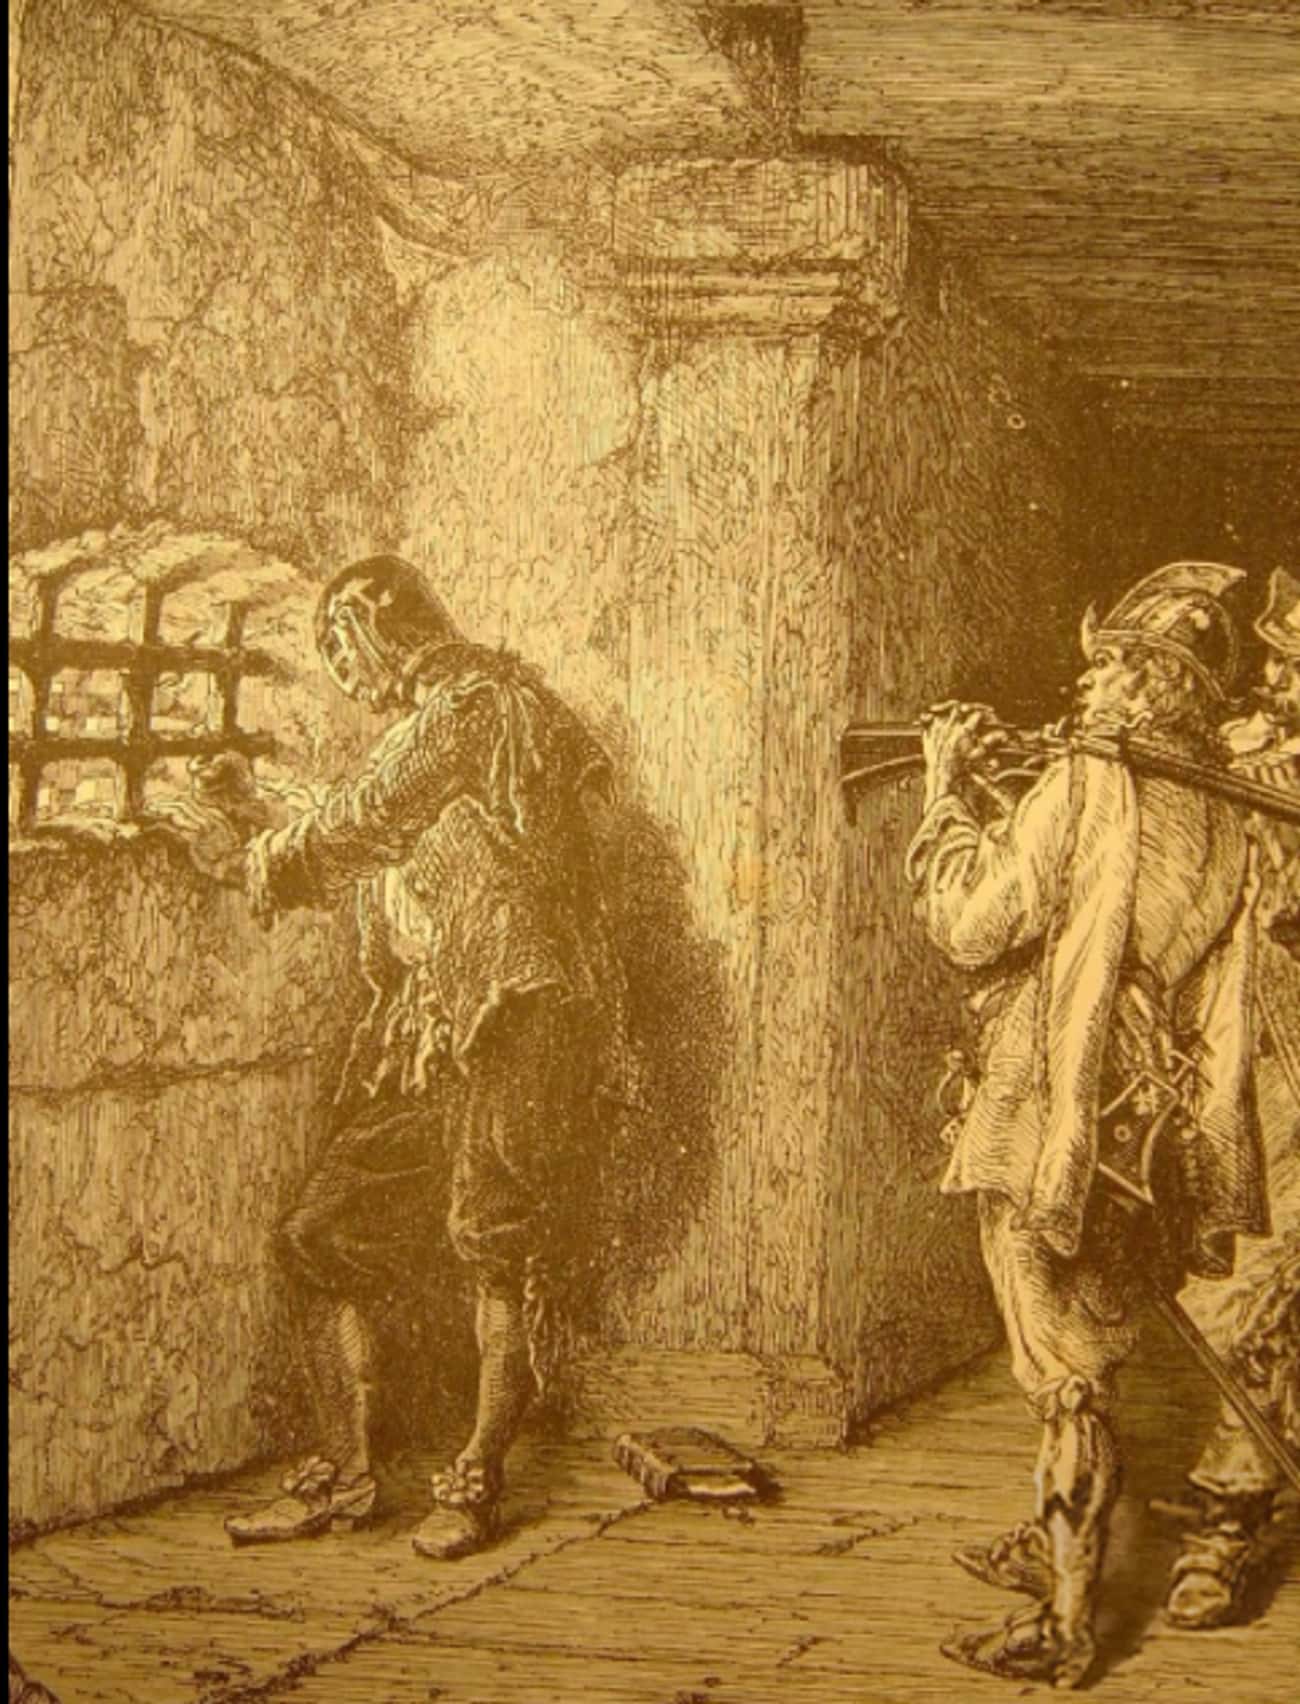 Rumors About The Mysterious Prisoner Started To Circulate In The 1680s